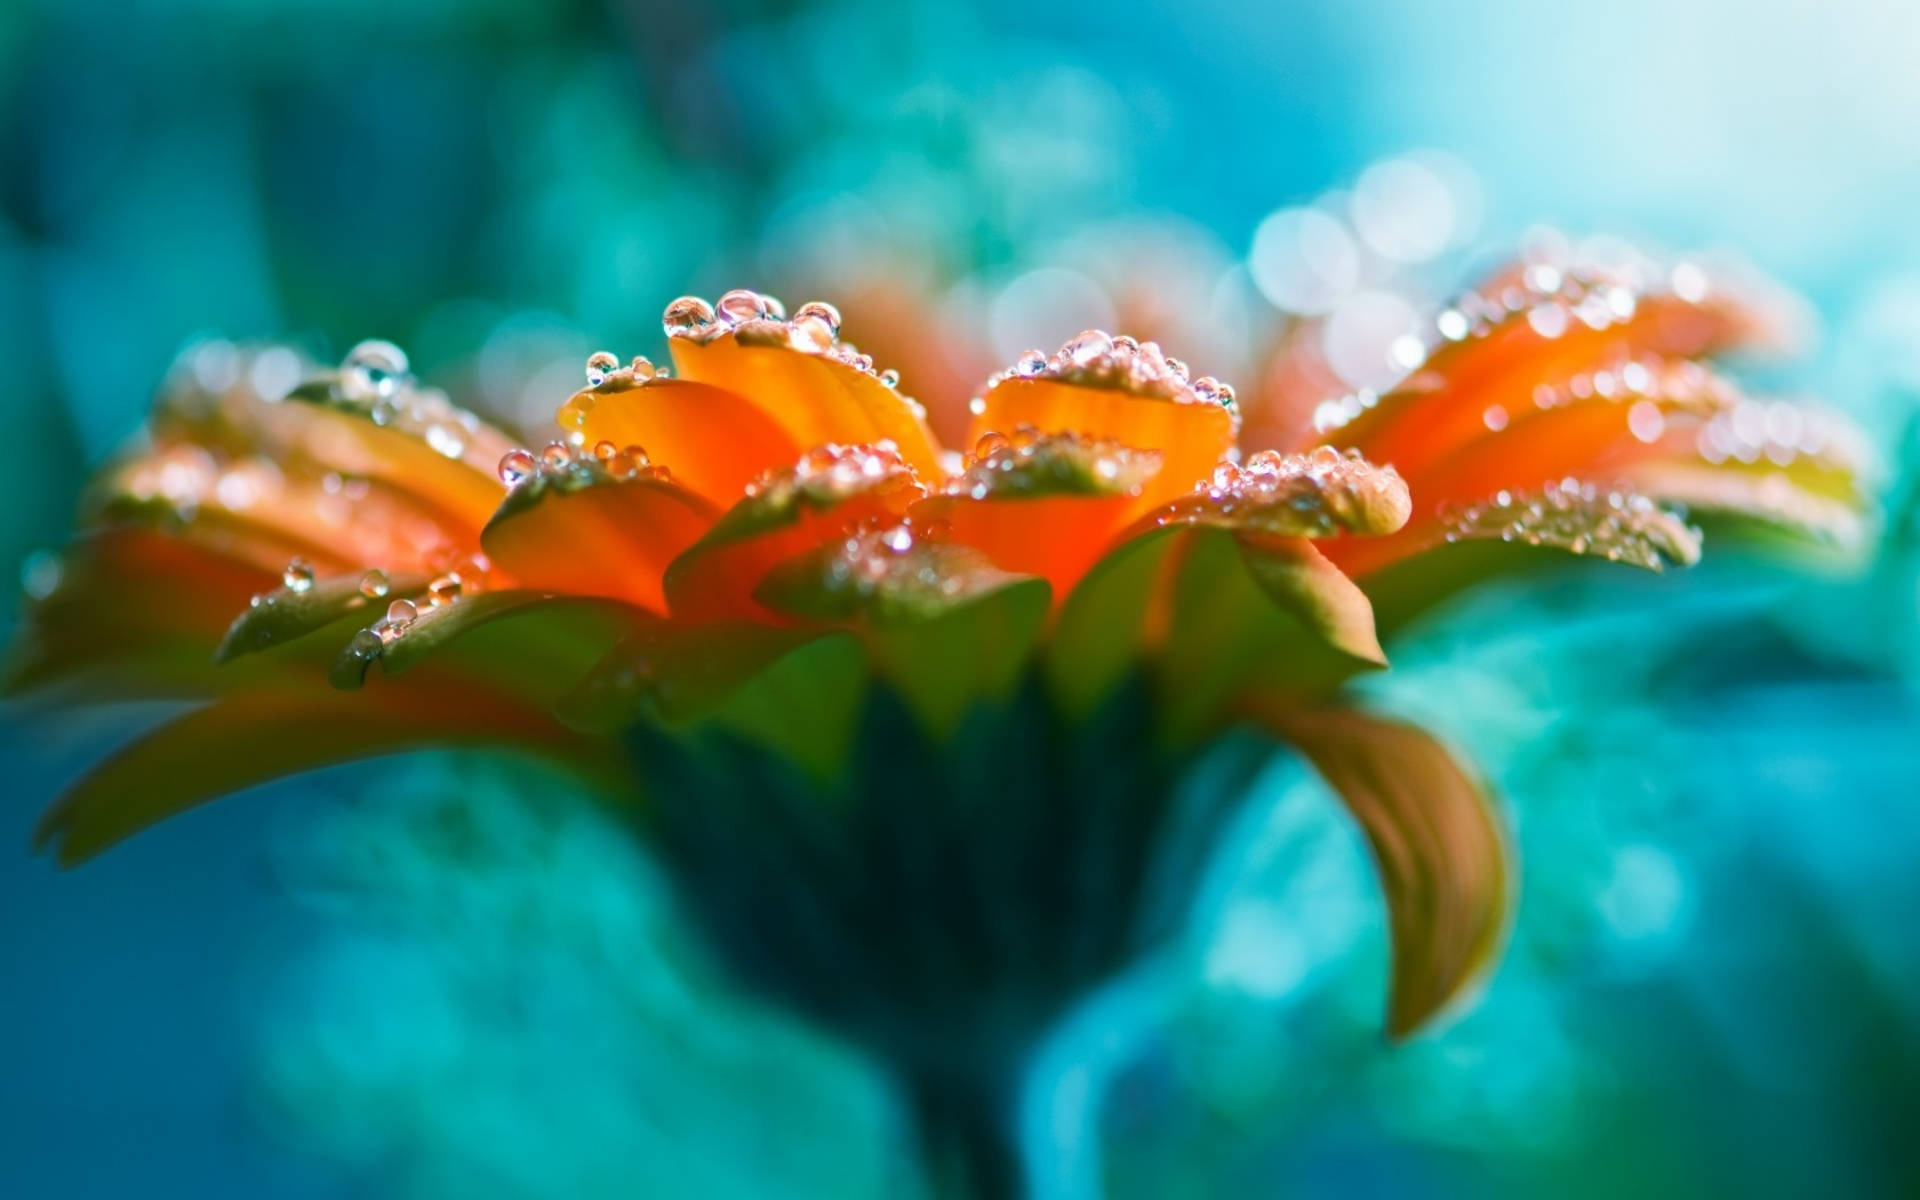 Bright flower shining beneath droplets of water Wallpaper